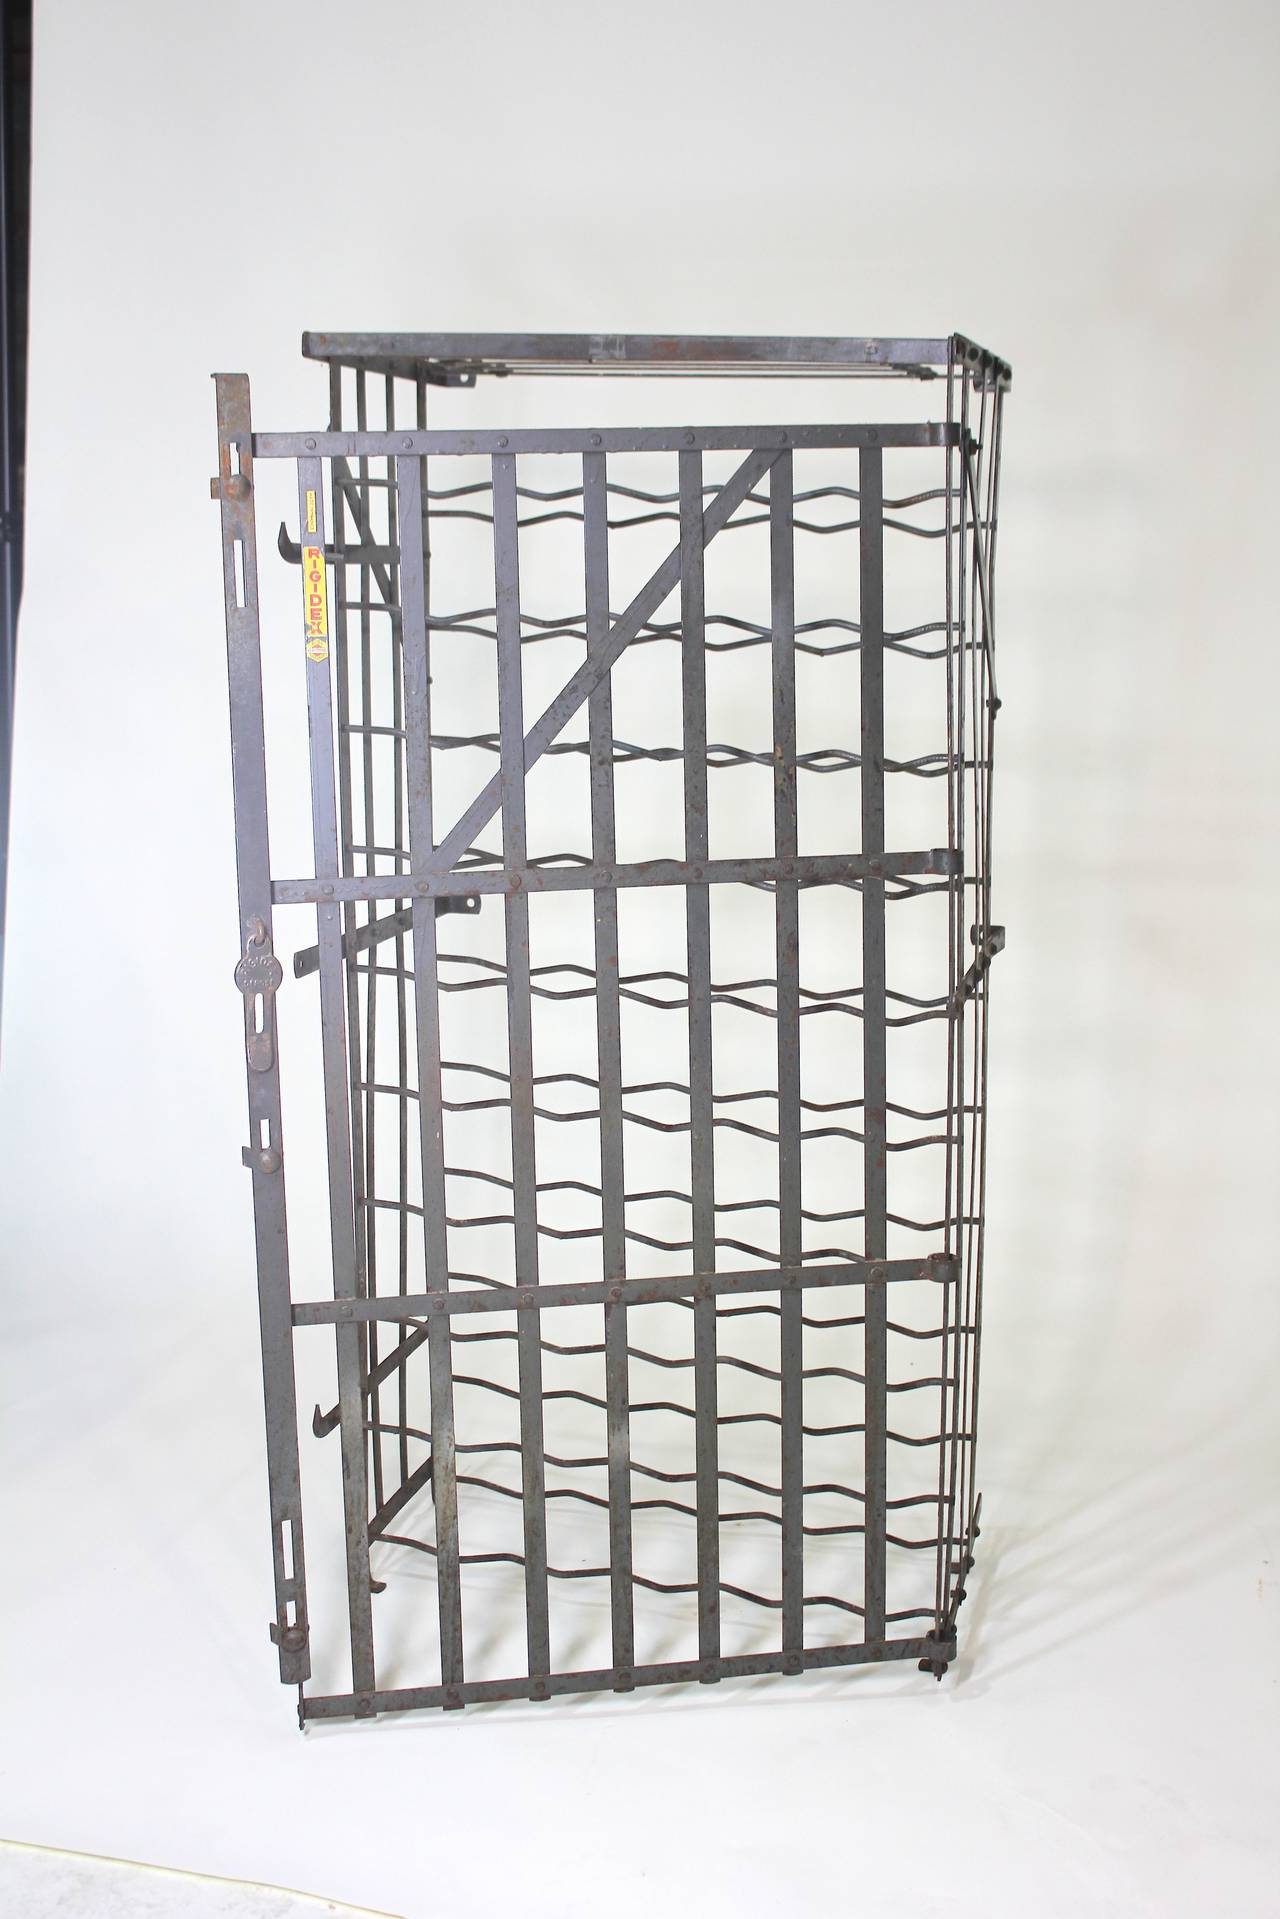 French, 50 bottle industrial liquor and wine rack safe holder, circa 1930s in steel with lockable door, with original cool yellow label Rigidex, made in France. There are installation flanges to the rear for fastening to the wall if desired, just